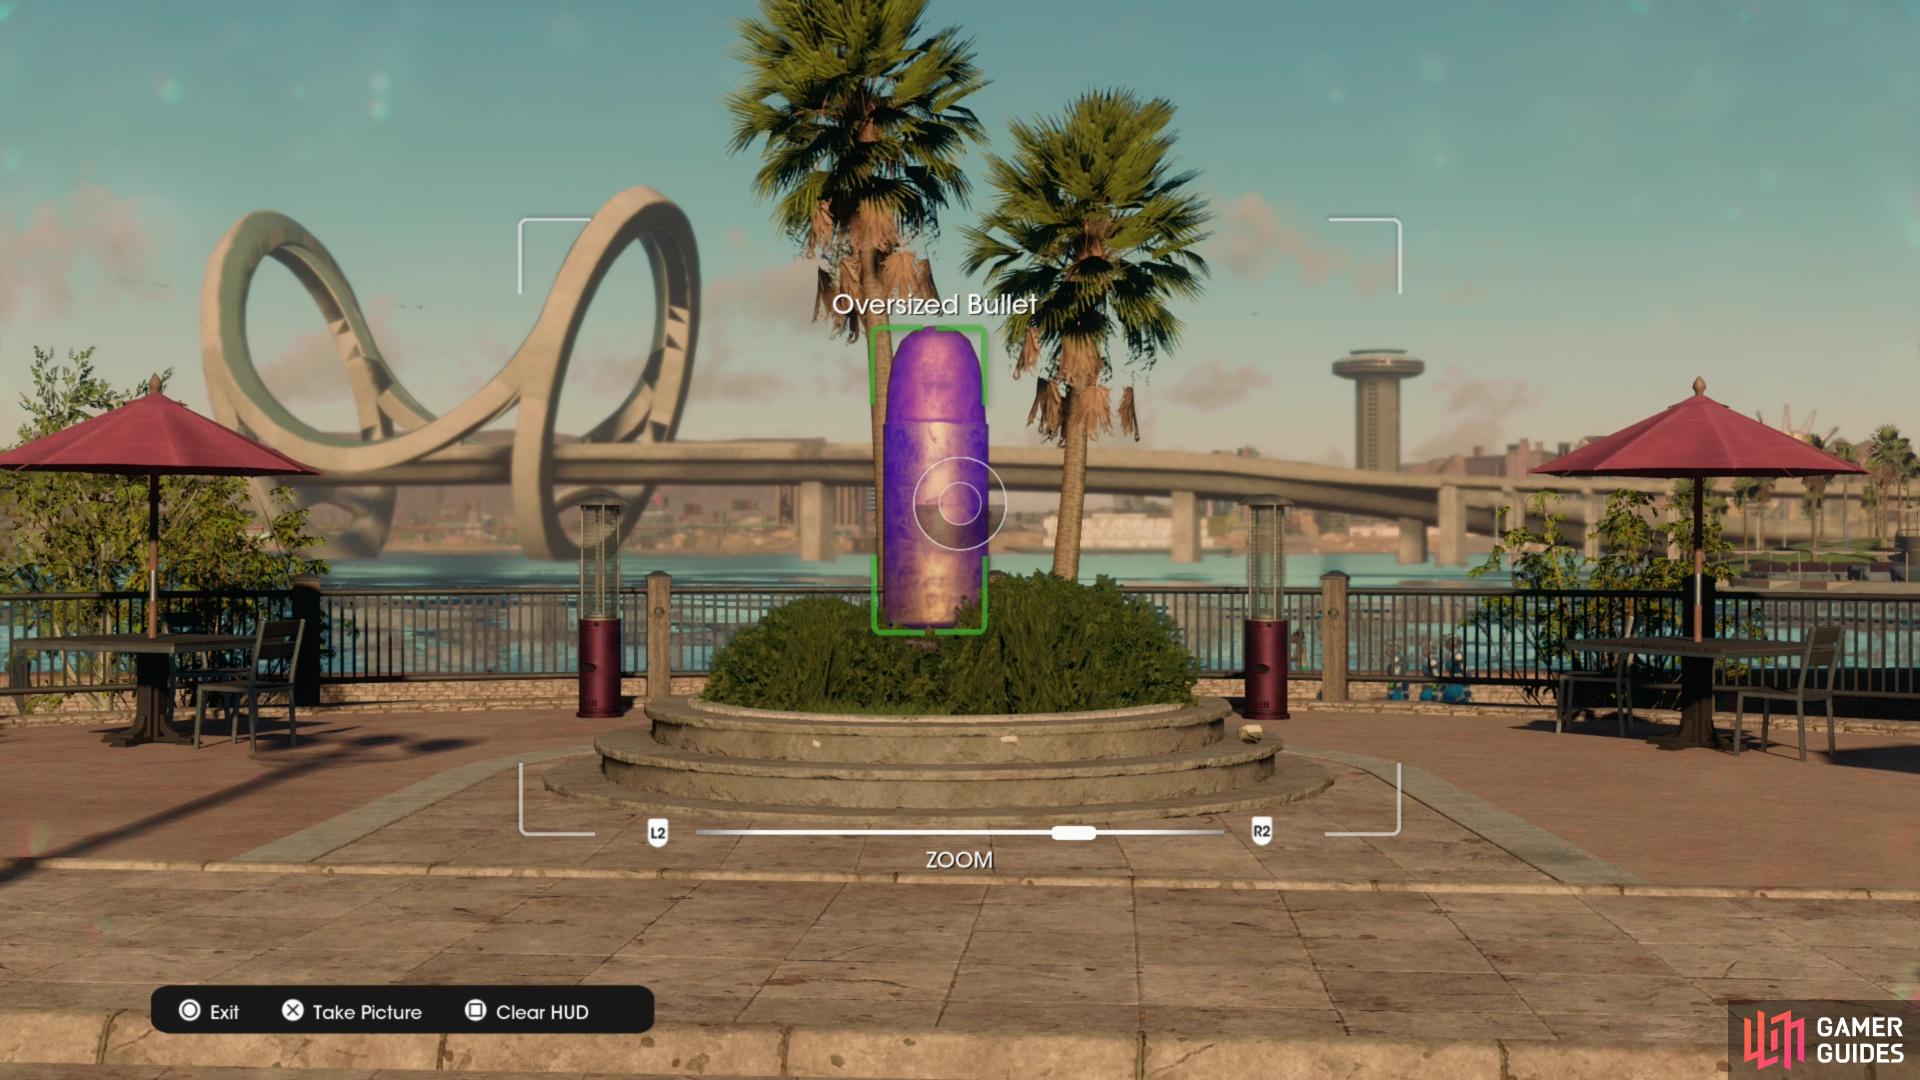 Take a picture of the "Oversized Bullet" collectible to obtain it.